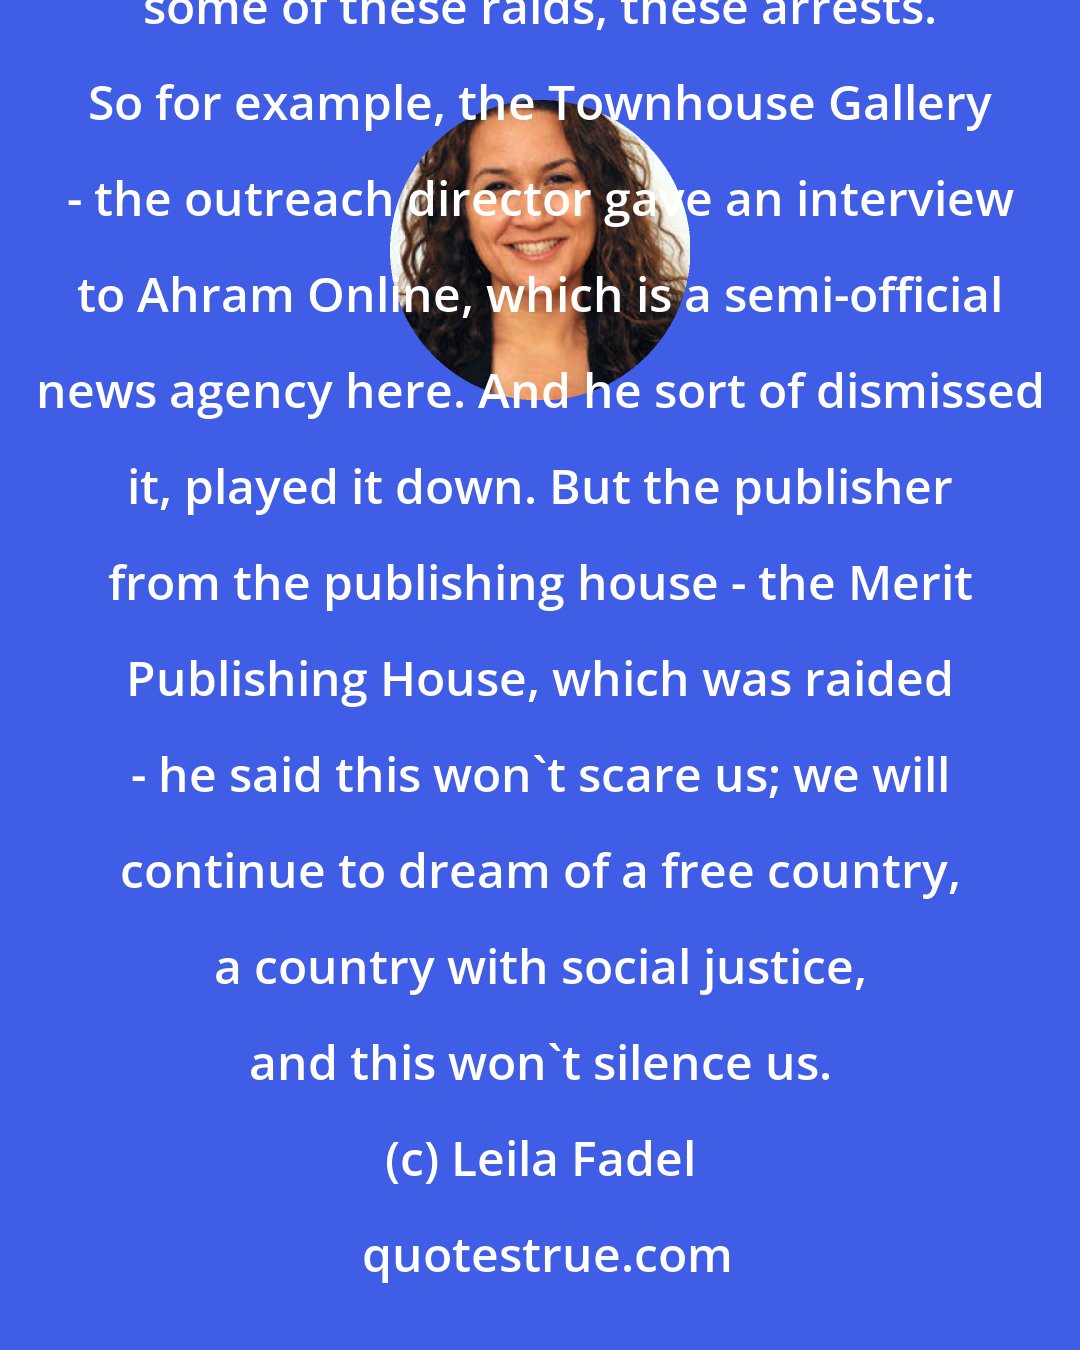 Leila Fadel: In some cases, people are silent; they're being complacent. But we're also seeing people speak out against some of these raids, these arrests. So for example, the Townhouse Gallery - the outreach director gave an interview to Ahram Online, which is a semi-official news agency here. And he sort of dismissed it, played it down. But the publisher from the publishing house - the Merit Publishing House, which was raided - he said this won't scare us; we will continue to dream of a free country, a country with social justice, and this won't silence us.